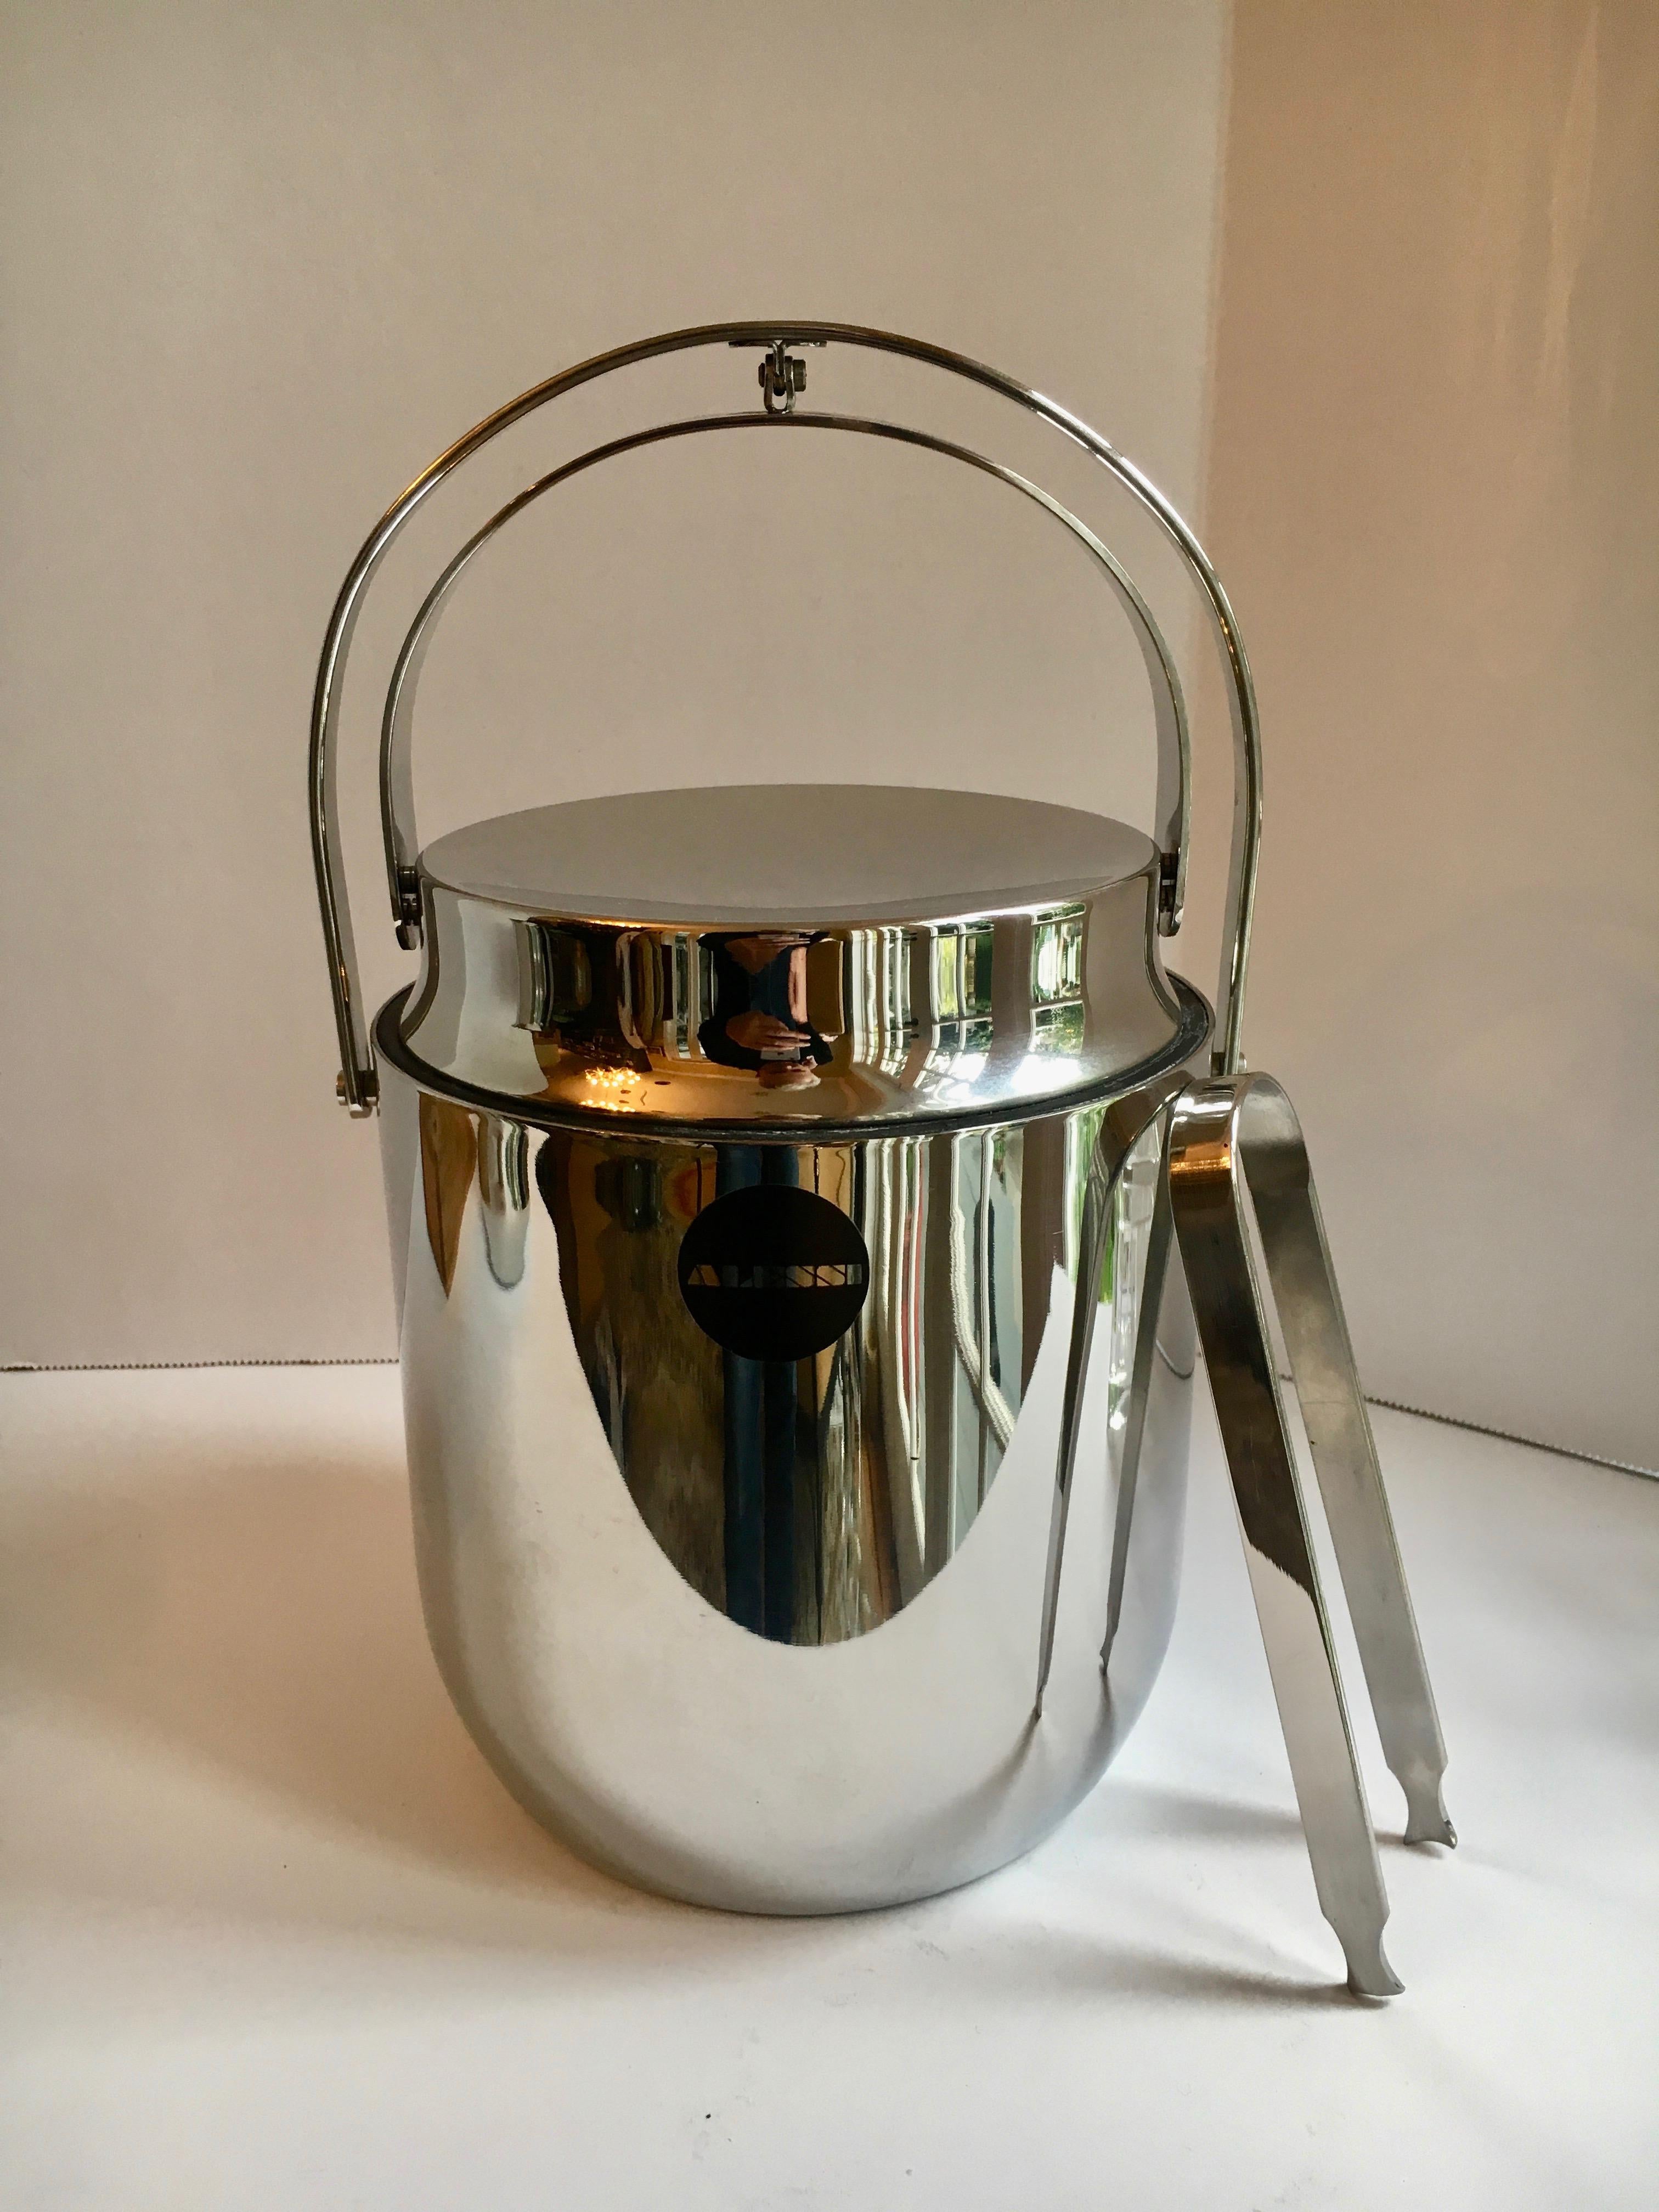 Alessi ice bucket tongs and pitcher - stainless steel and in perfect condition, ice bucket has removable plastic liner with drainage holes - pitcher and tongs match. We have left on the Alessi sticker, but the black dot can be easily removed 

The